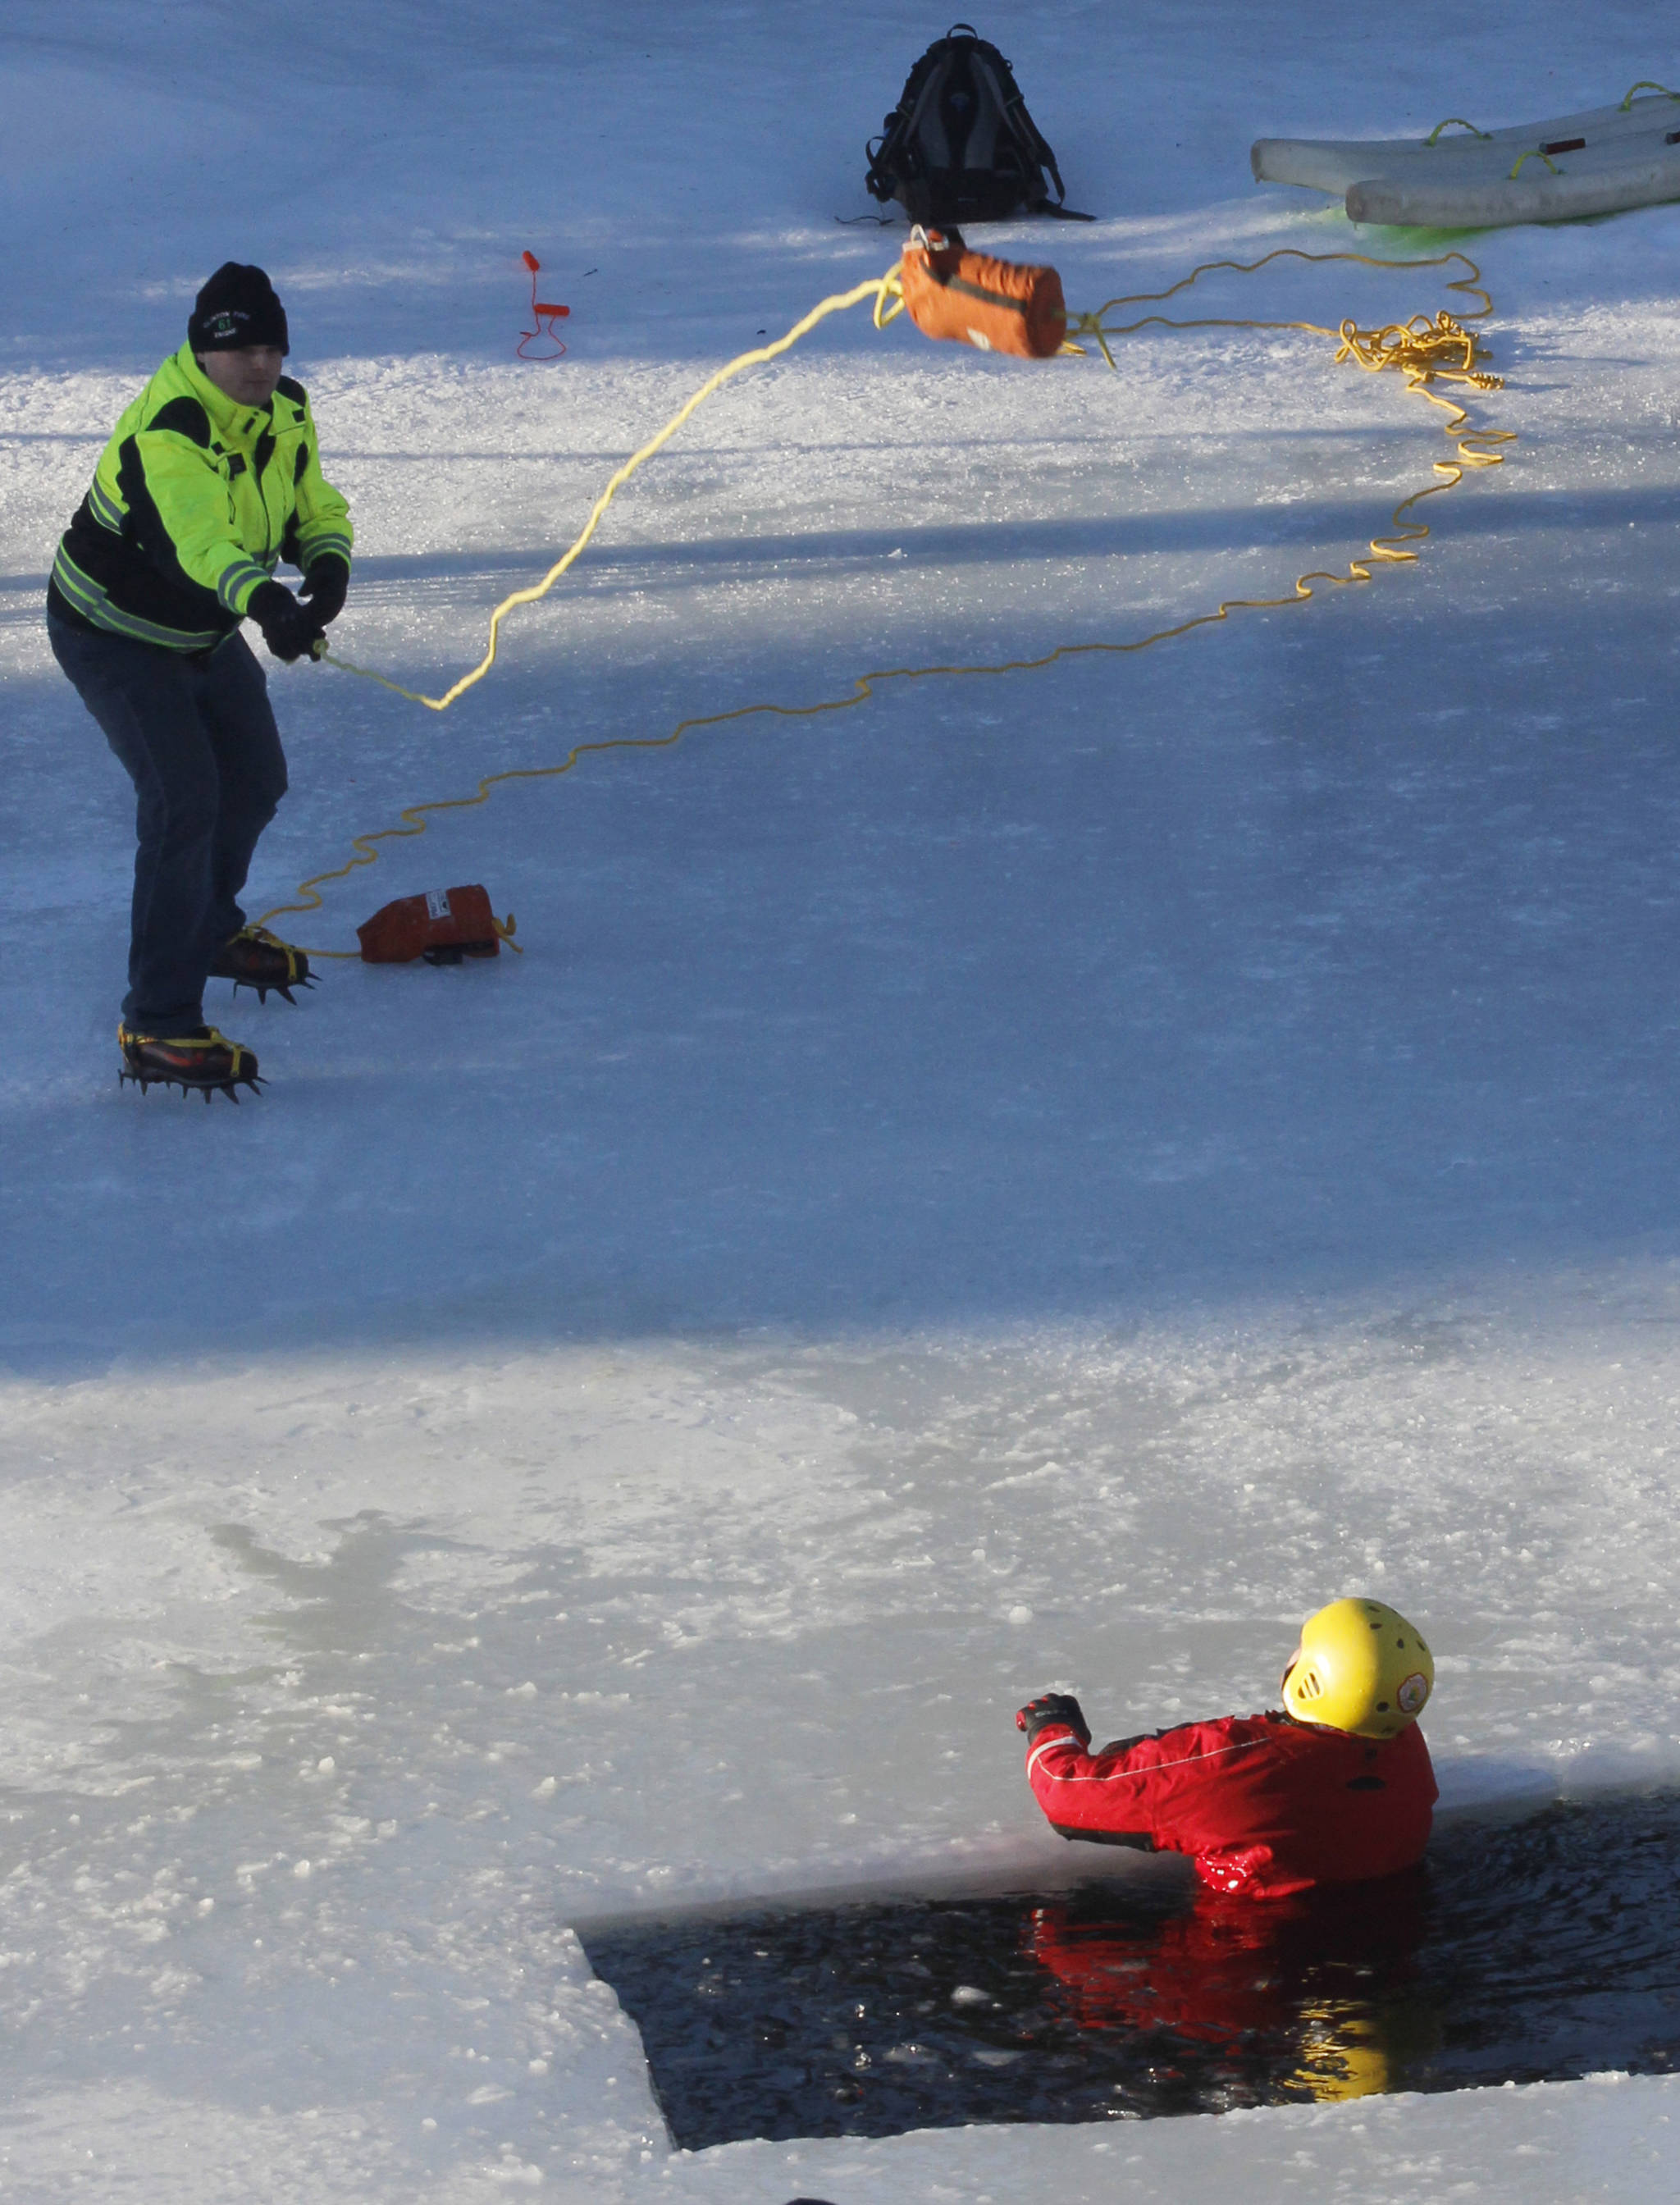 Capital City Fire/Rescue Firefighter and Paramedic Cory Hutchison throws a rescue rope to CCFR Special Teams Member Pete Boyd during a demonstration on how to get out of the water if you’ve fallen through the ice. The demonstration, which took place Saturday at the Mendenhall Glacier Visitor Center, drew about 60 people and included a presentation with tips on how to be prepared in case you or another person falls through the ice. (Alex McCarthy | Juneau Empire)